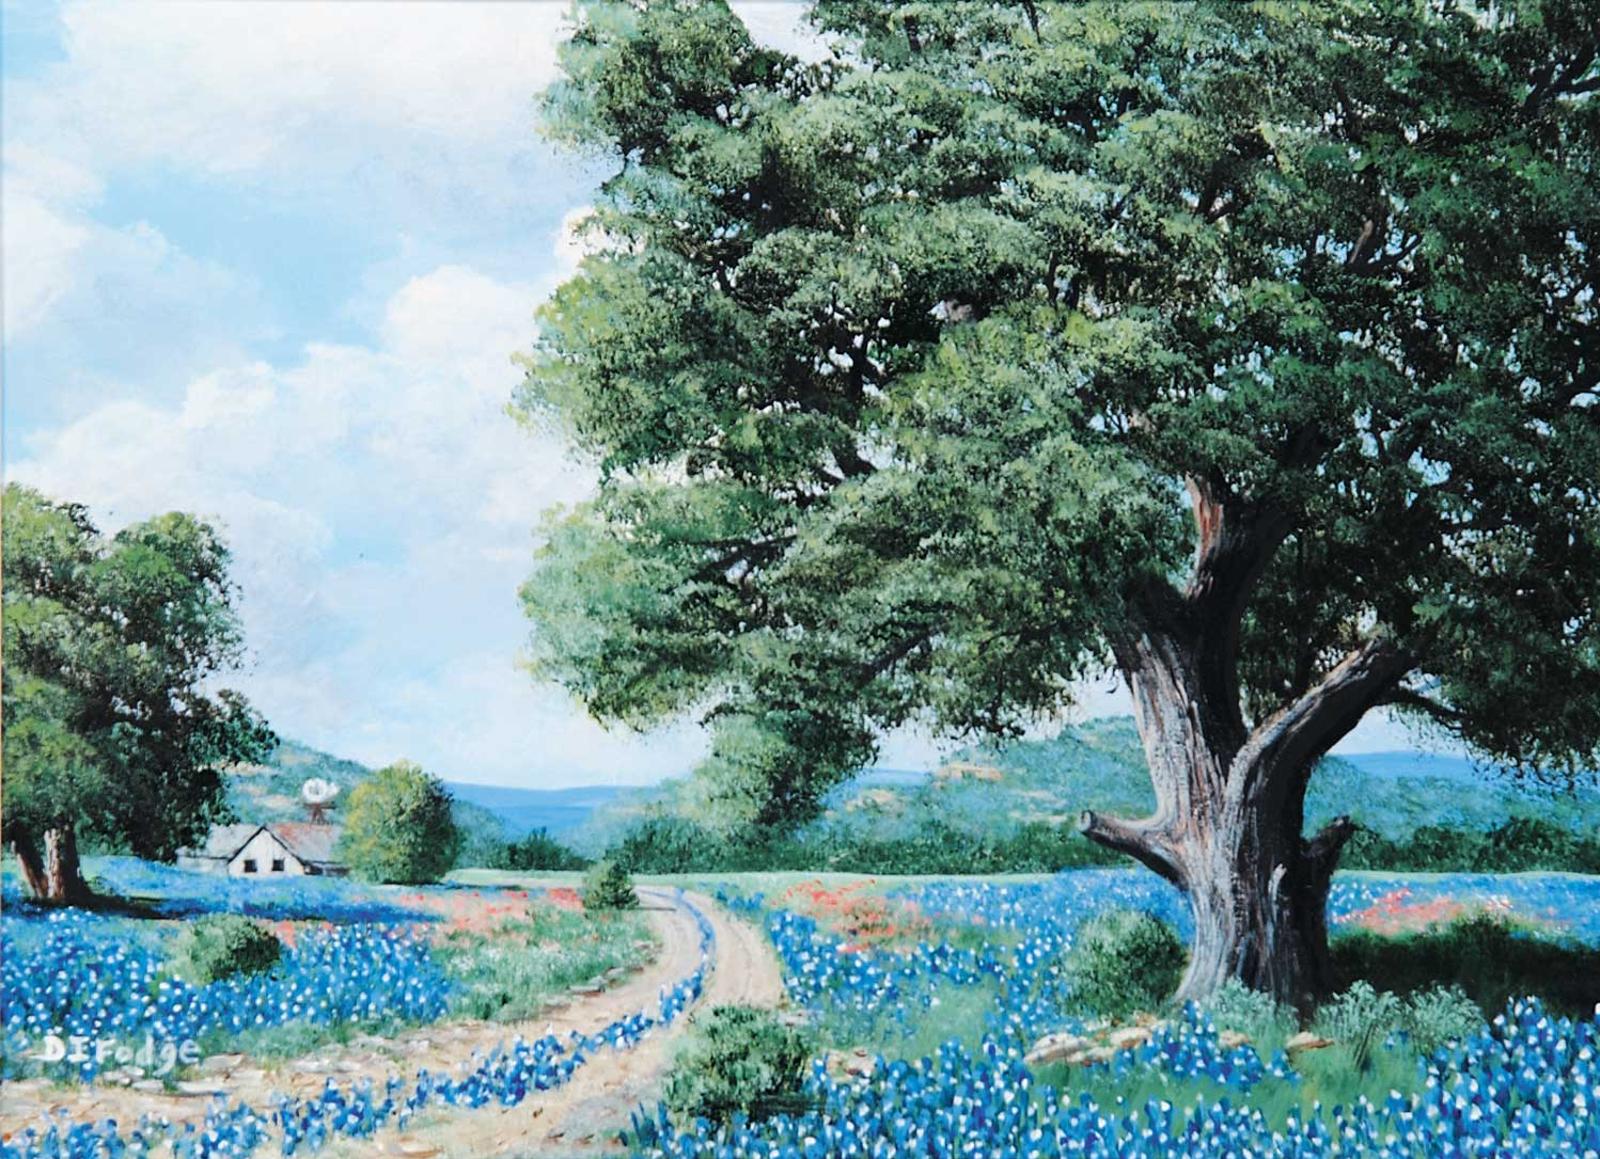 Diane Fodge - Untitled - Field of Blue FLowers